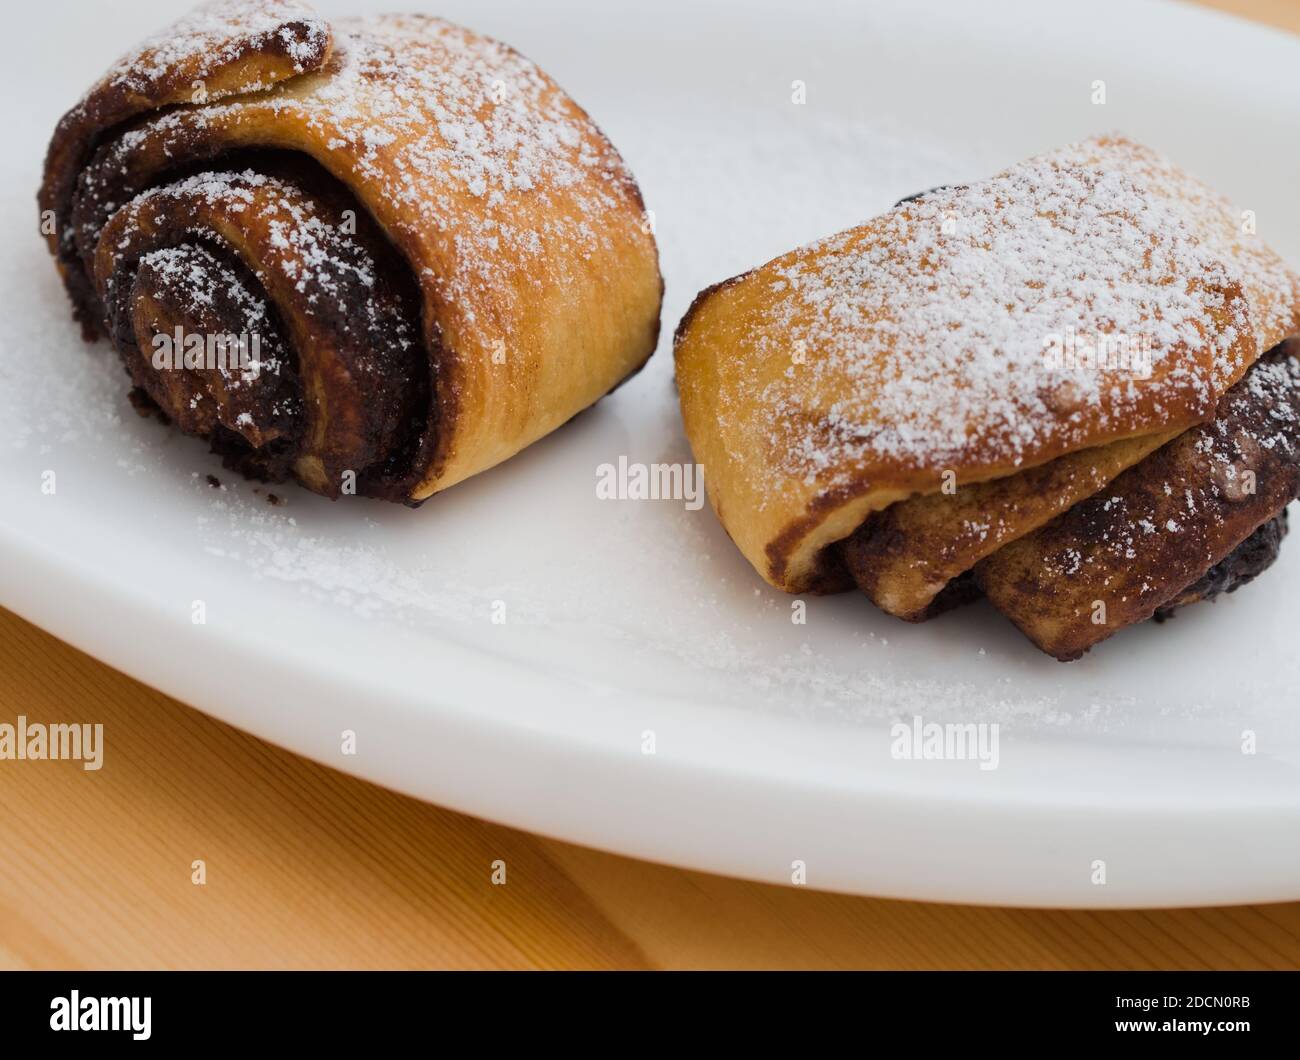 Delicious Cocoa Snails on a White Plate Closeup Stock Photo